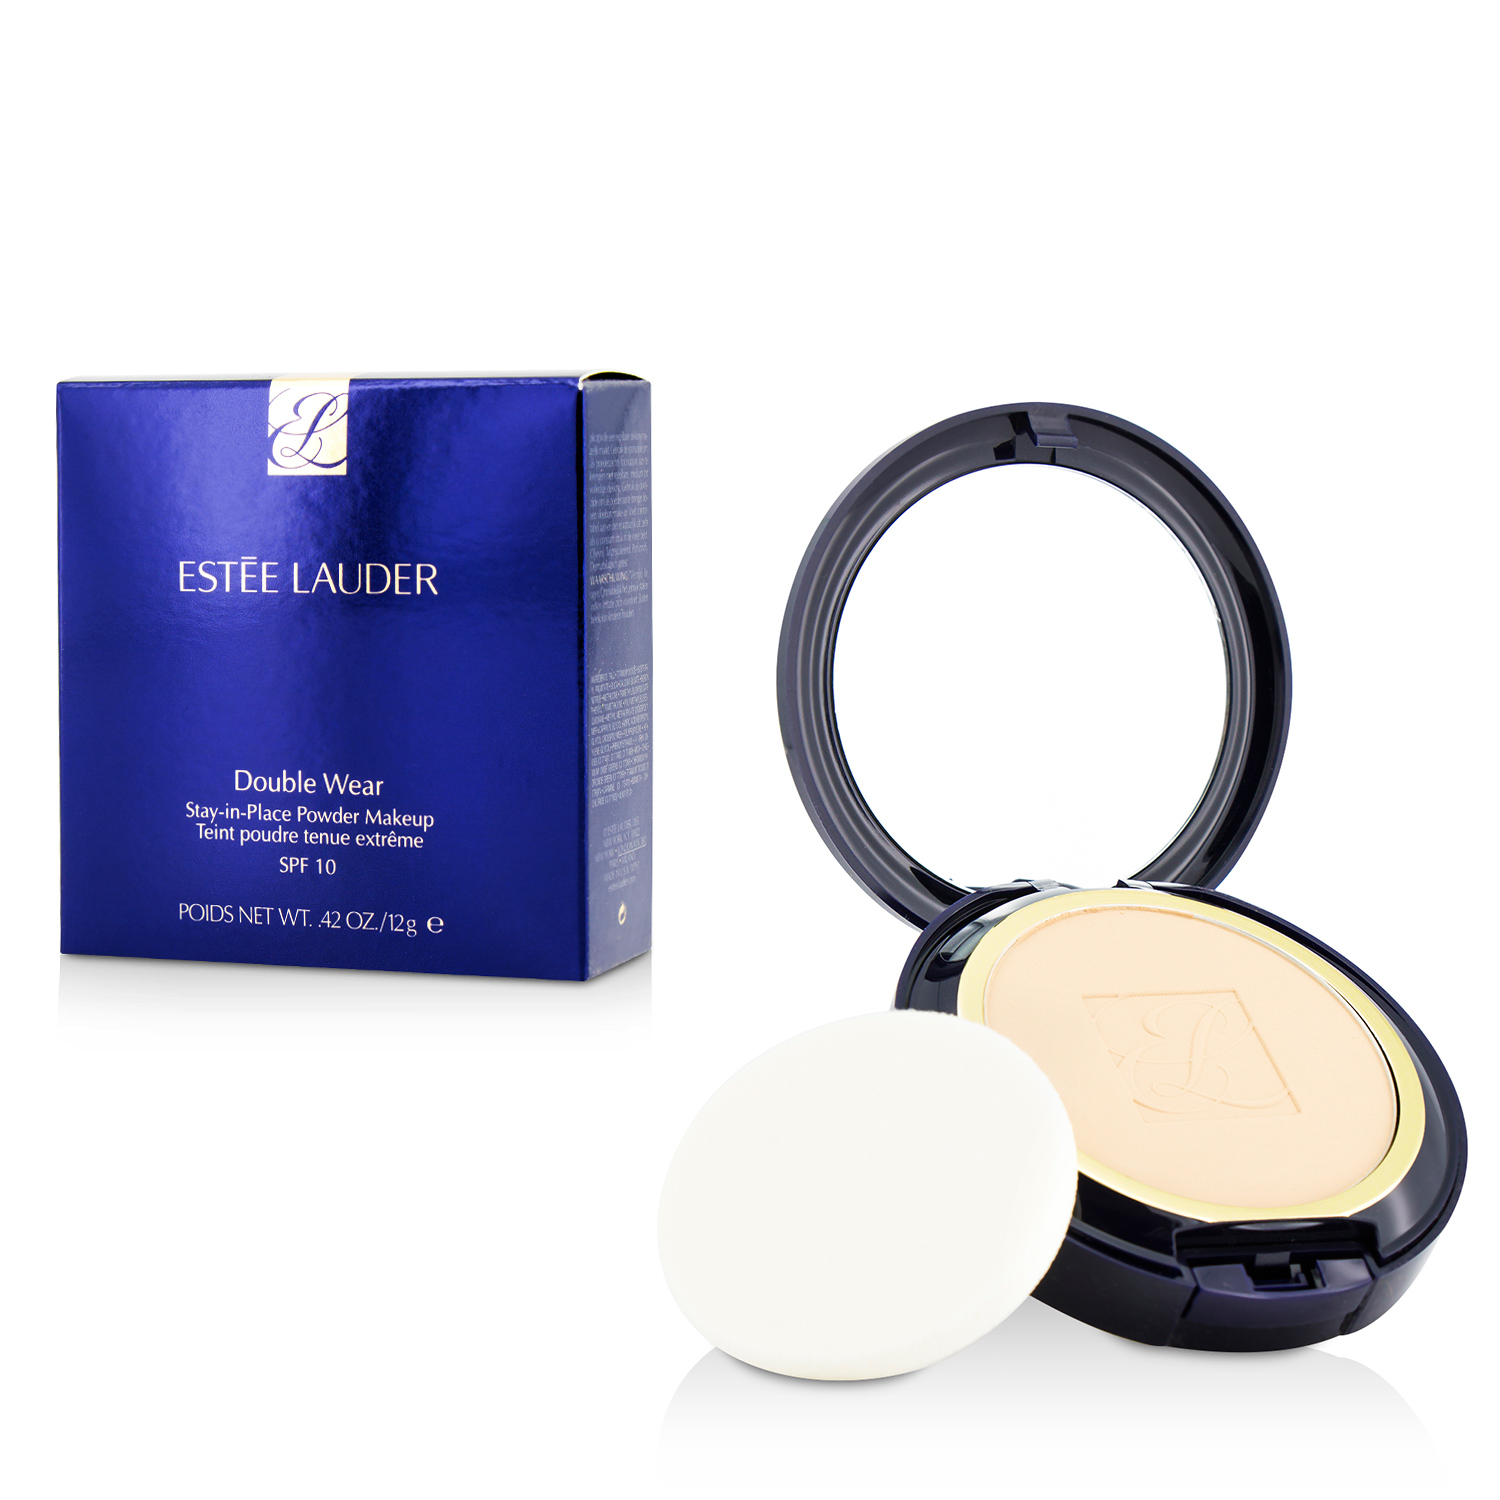 New Double Wear Stay In Place Powder Makeup SPF10 - No. 26 Dawn (2W1) Estee Lauder Image